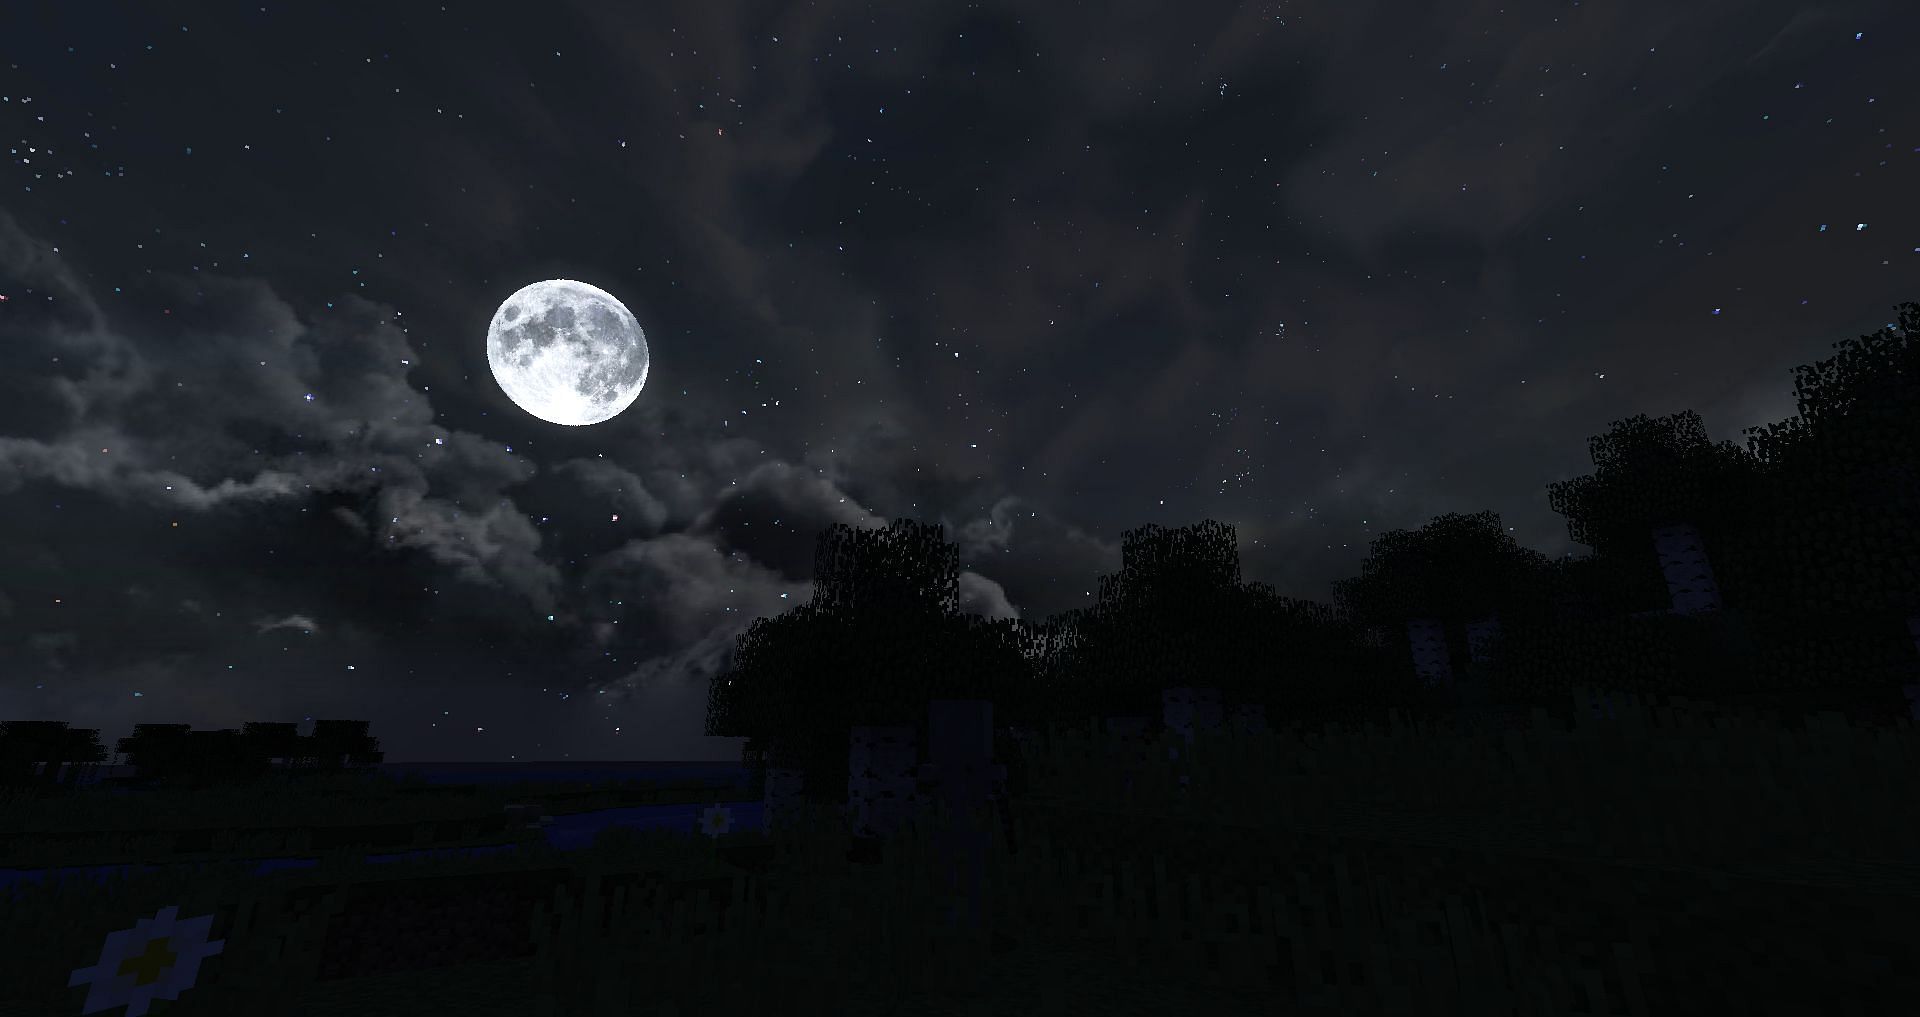 The Dramatic Skys resource pack adds high-resolution sky textures to Minecraft 1.19.4 (Image via CurseForge)